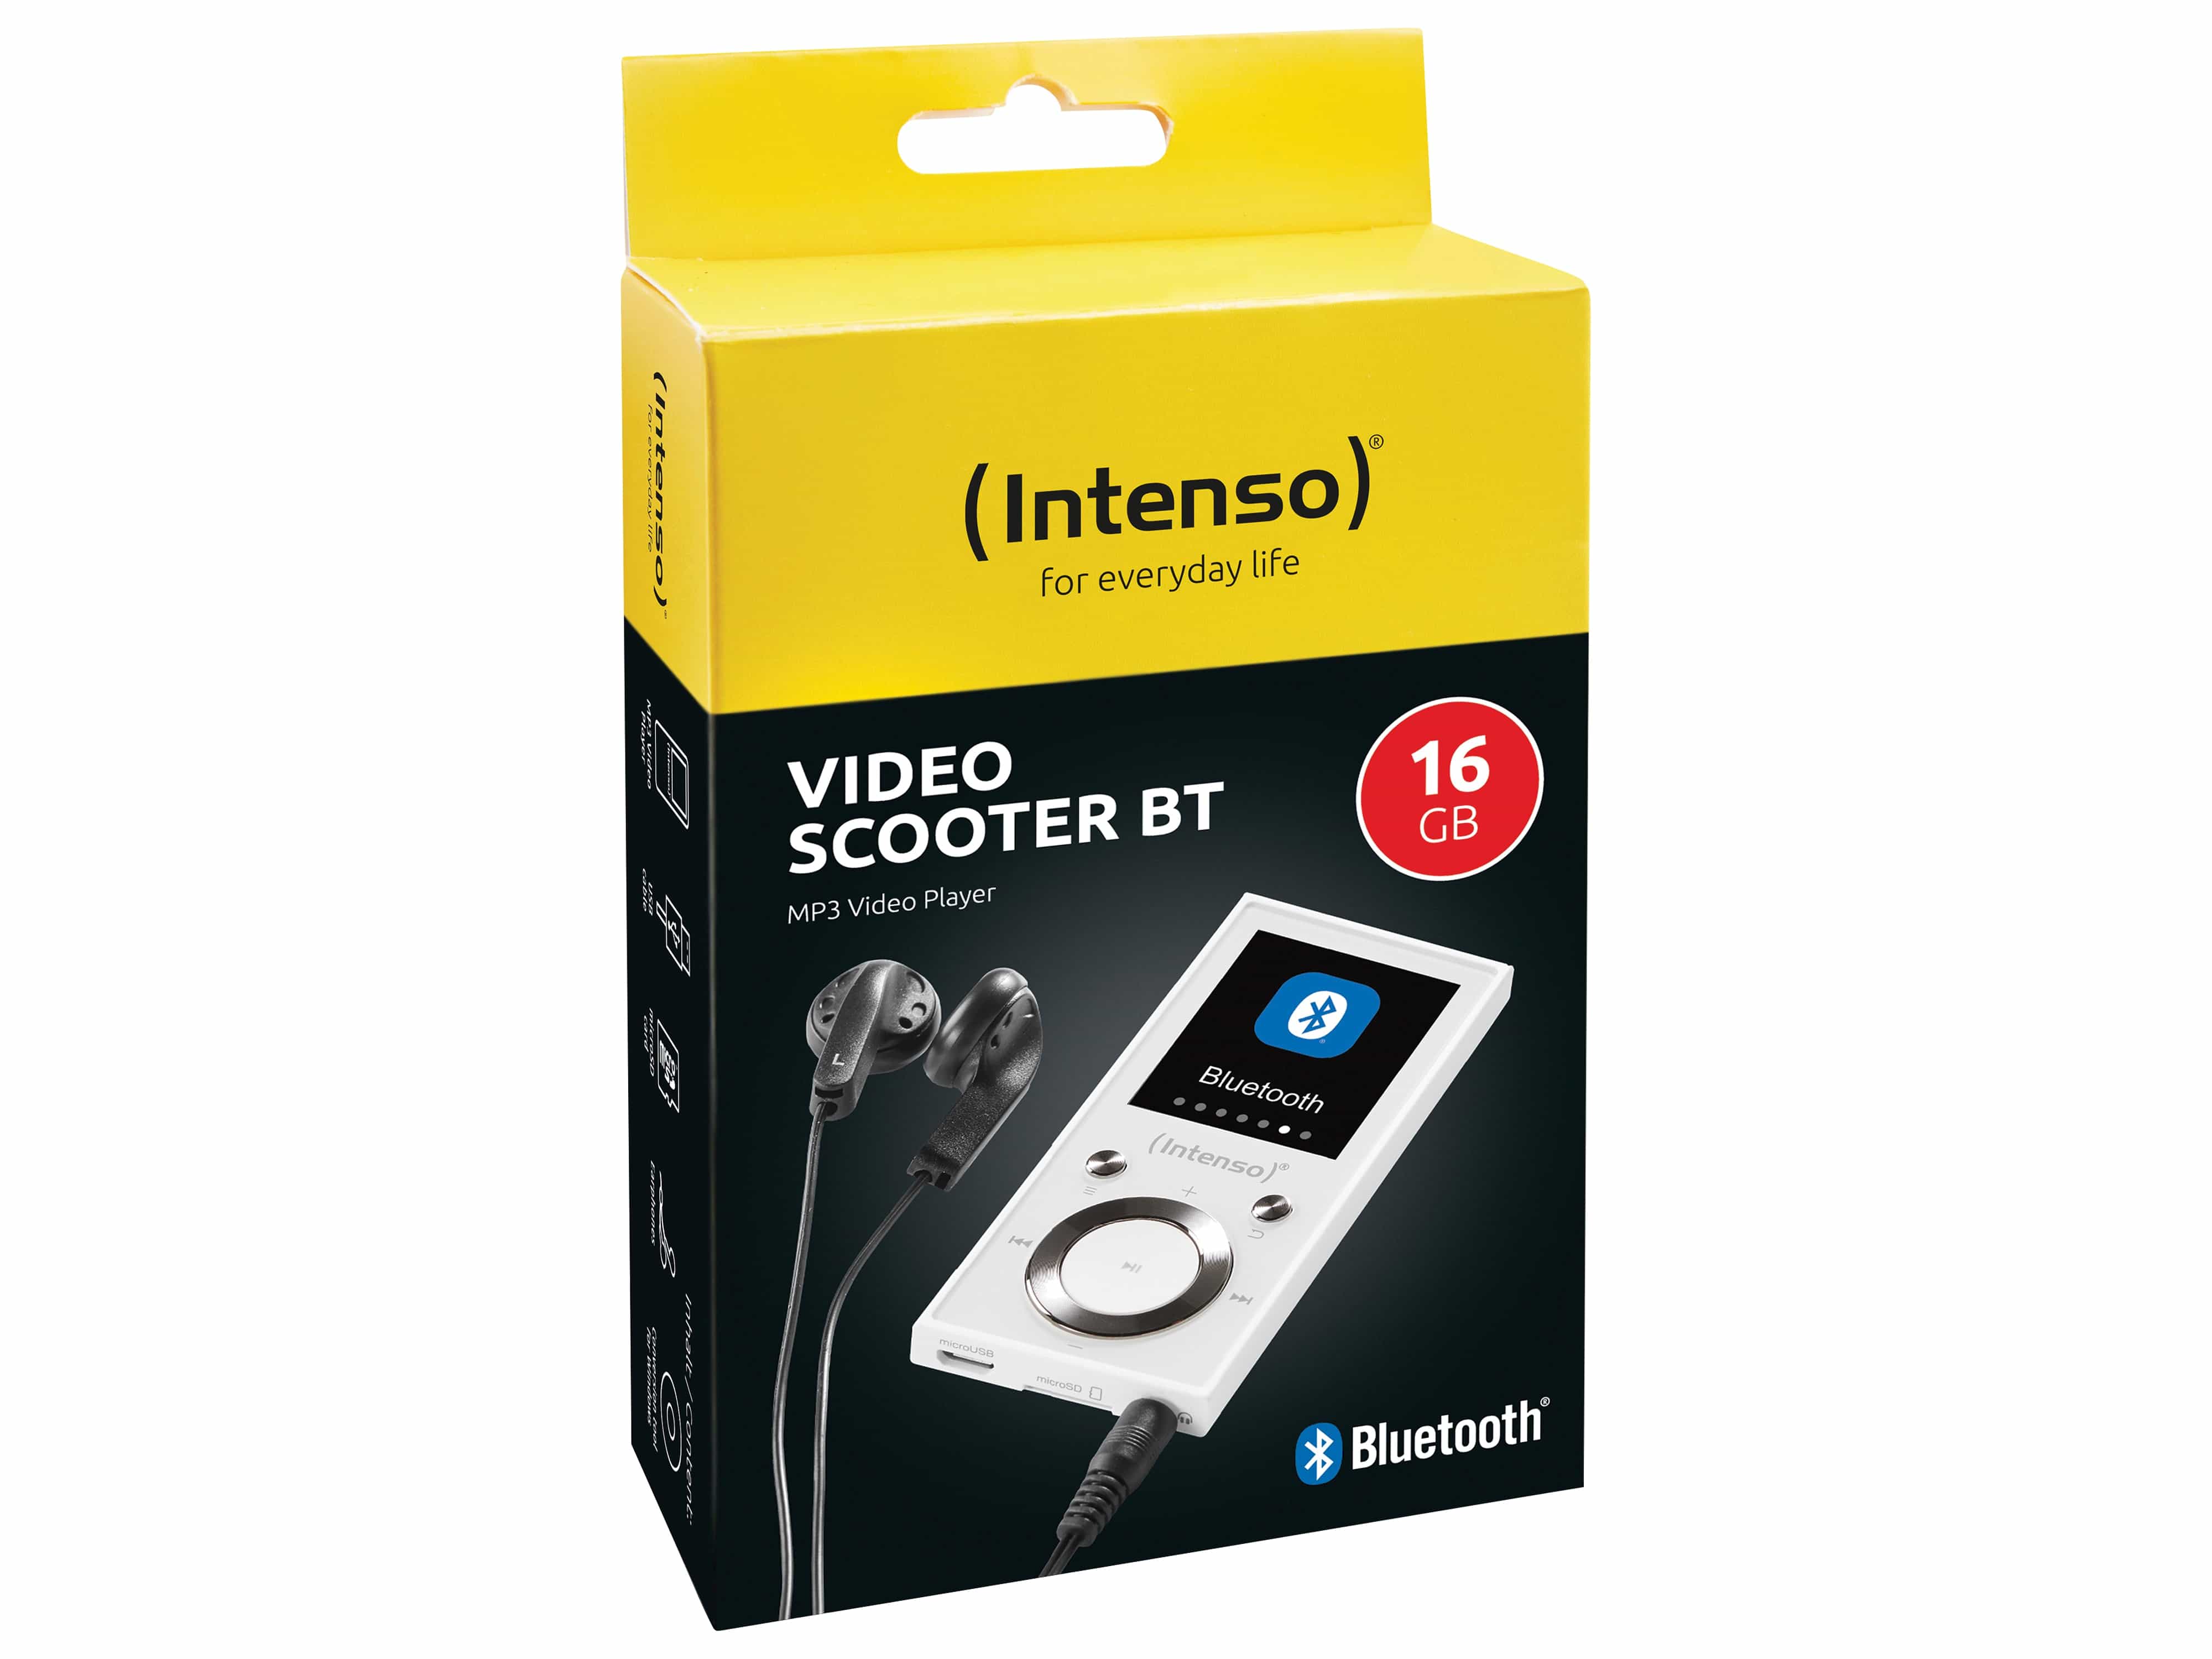 INTENSO MP3-Videoplayer 3717472, Video Scooter BT, 16 GB, weiß